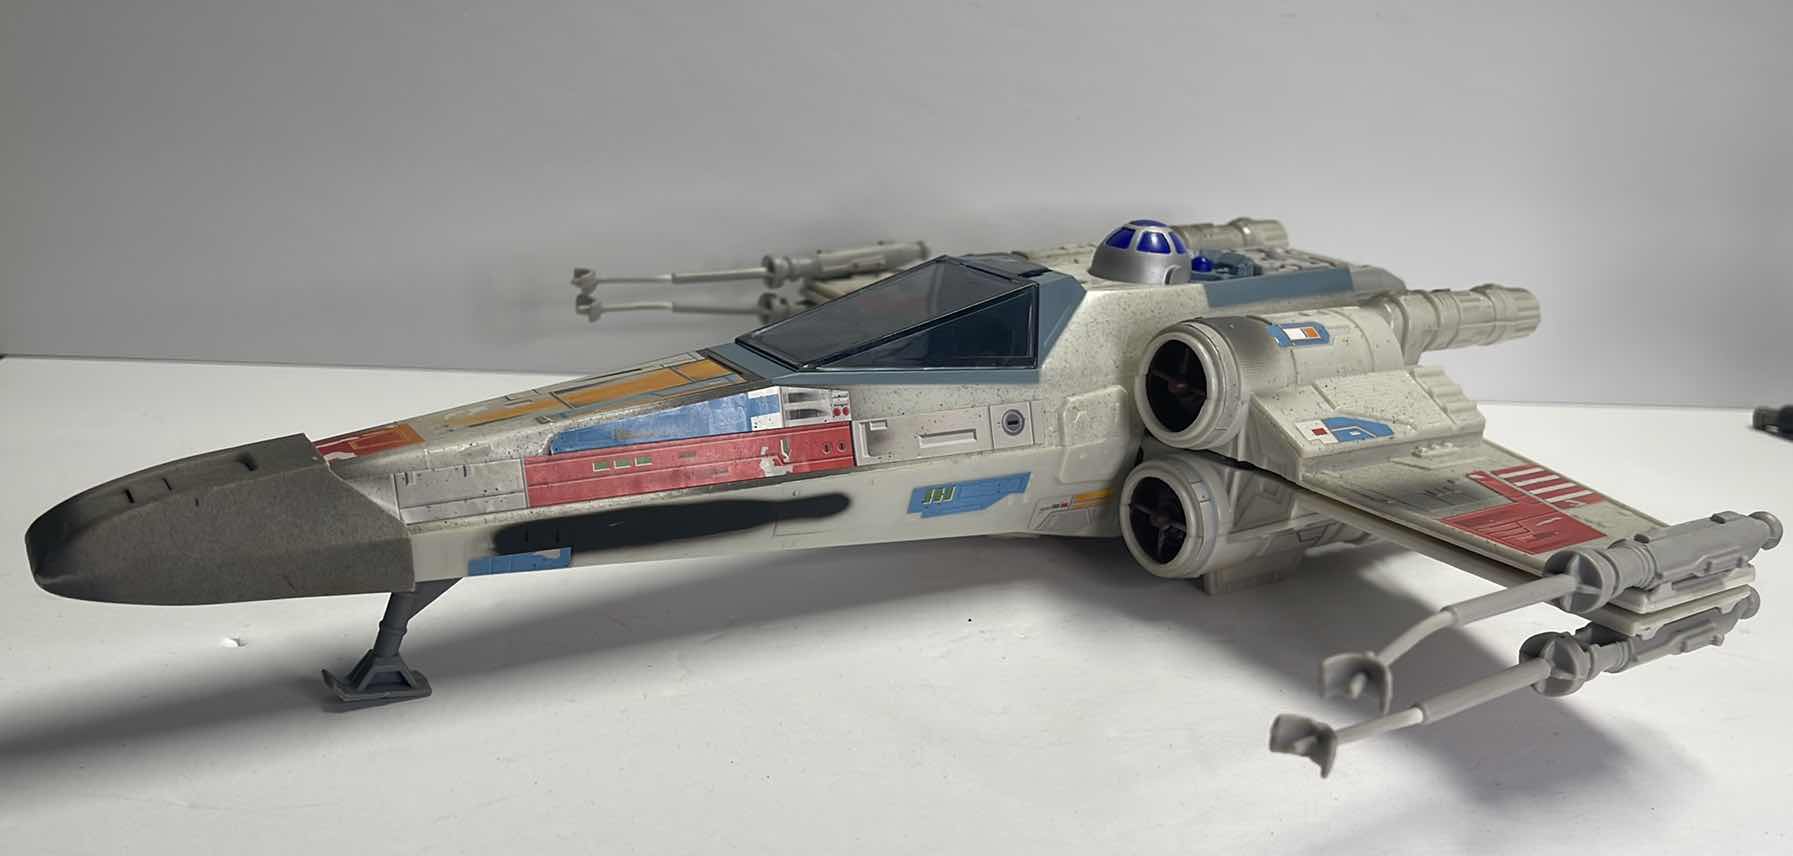 Photo 1 of VINTAGE STAR WARS X-WING FIGHTER ORIGINAL TRILOGY COLLECTION – RETAIL PRICE $30.00